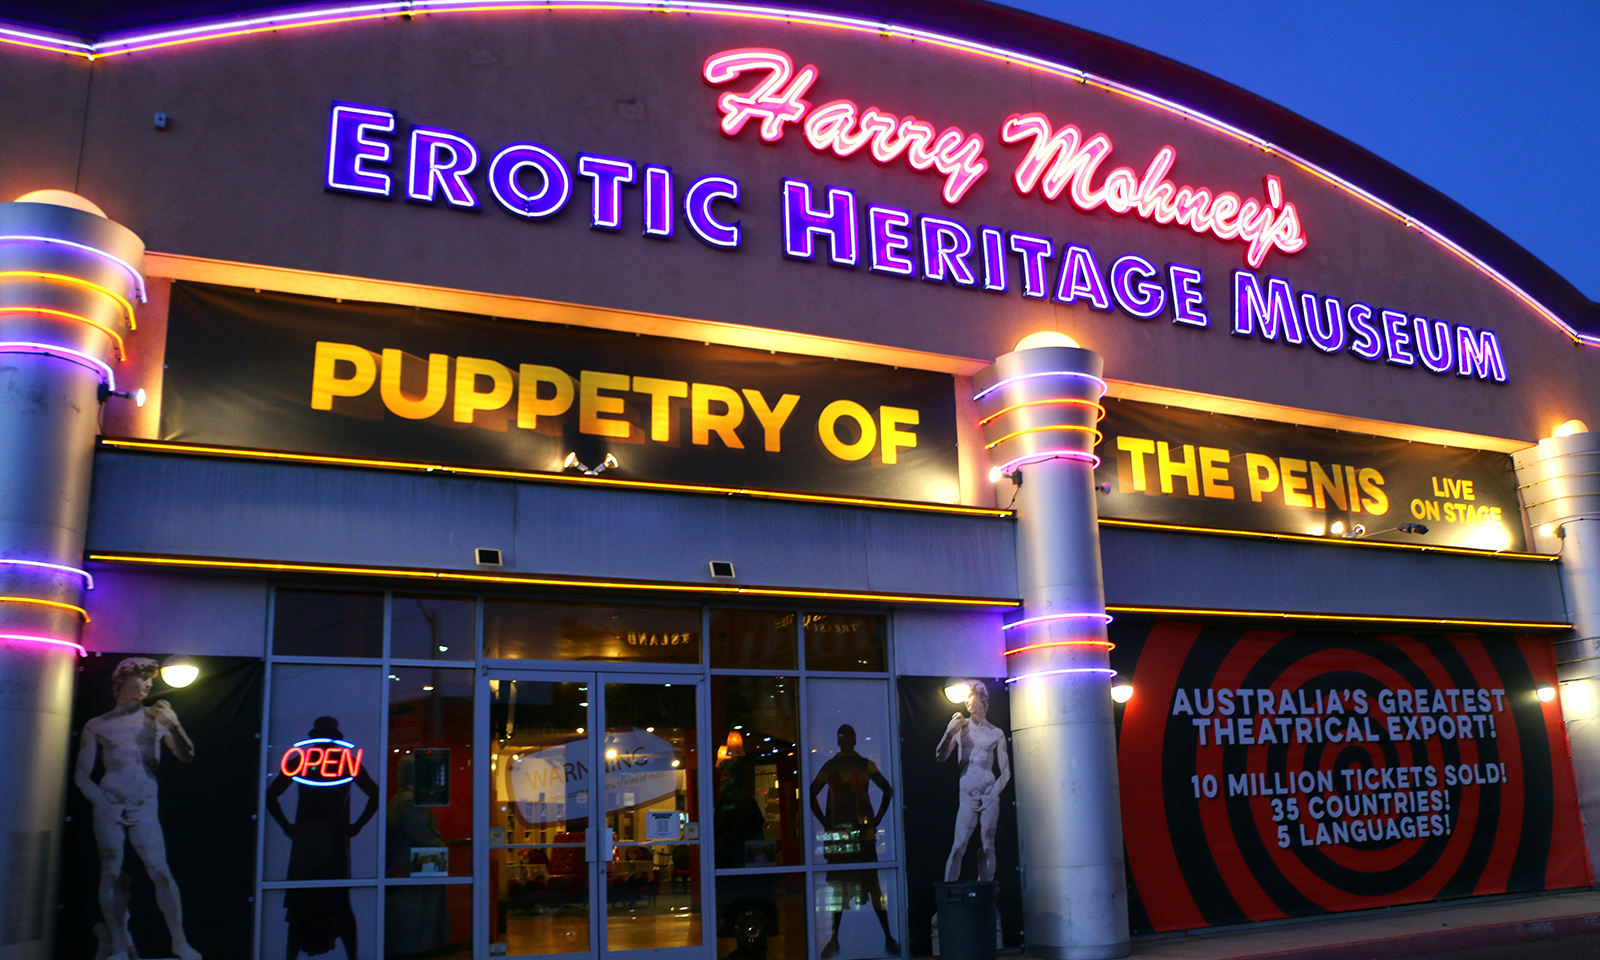 Las Vegas' Erotic Heritage Museum Will Reopen On May 22